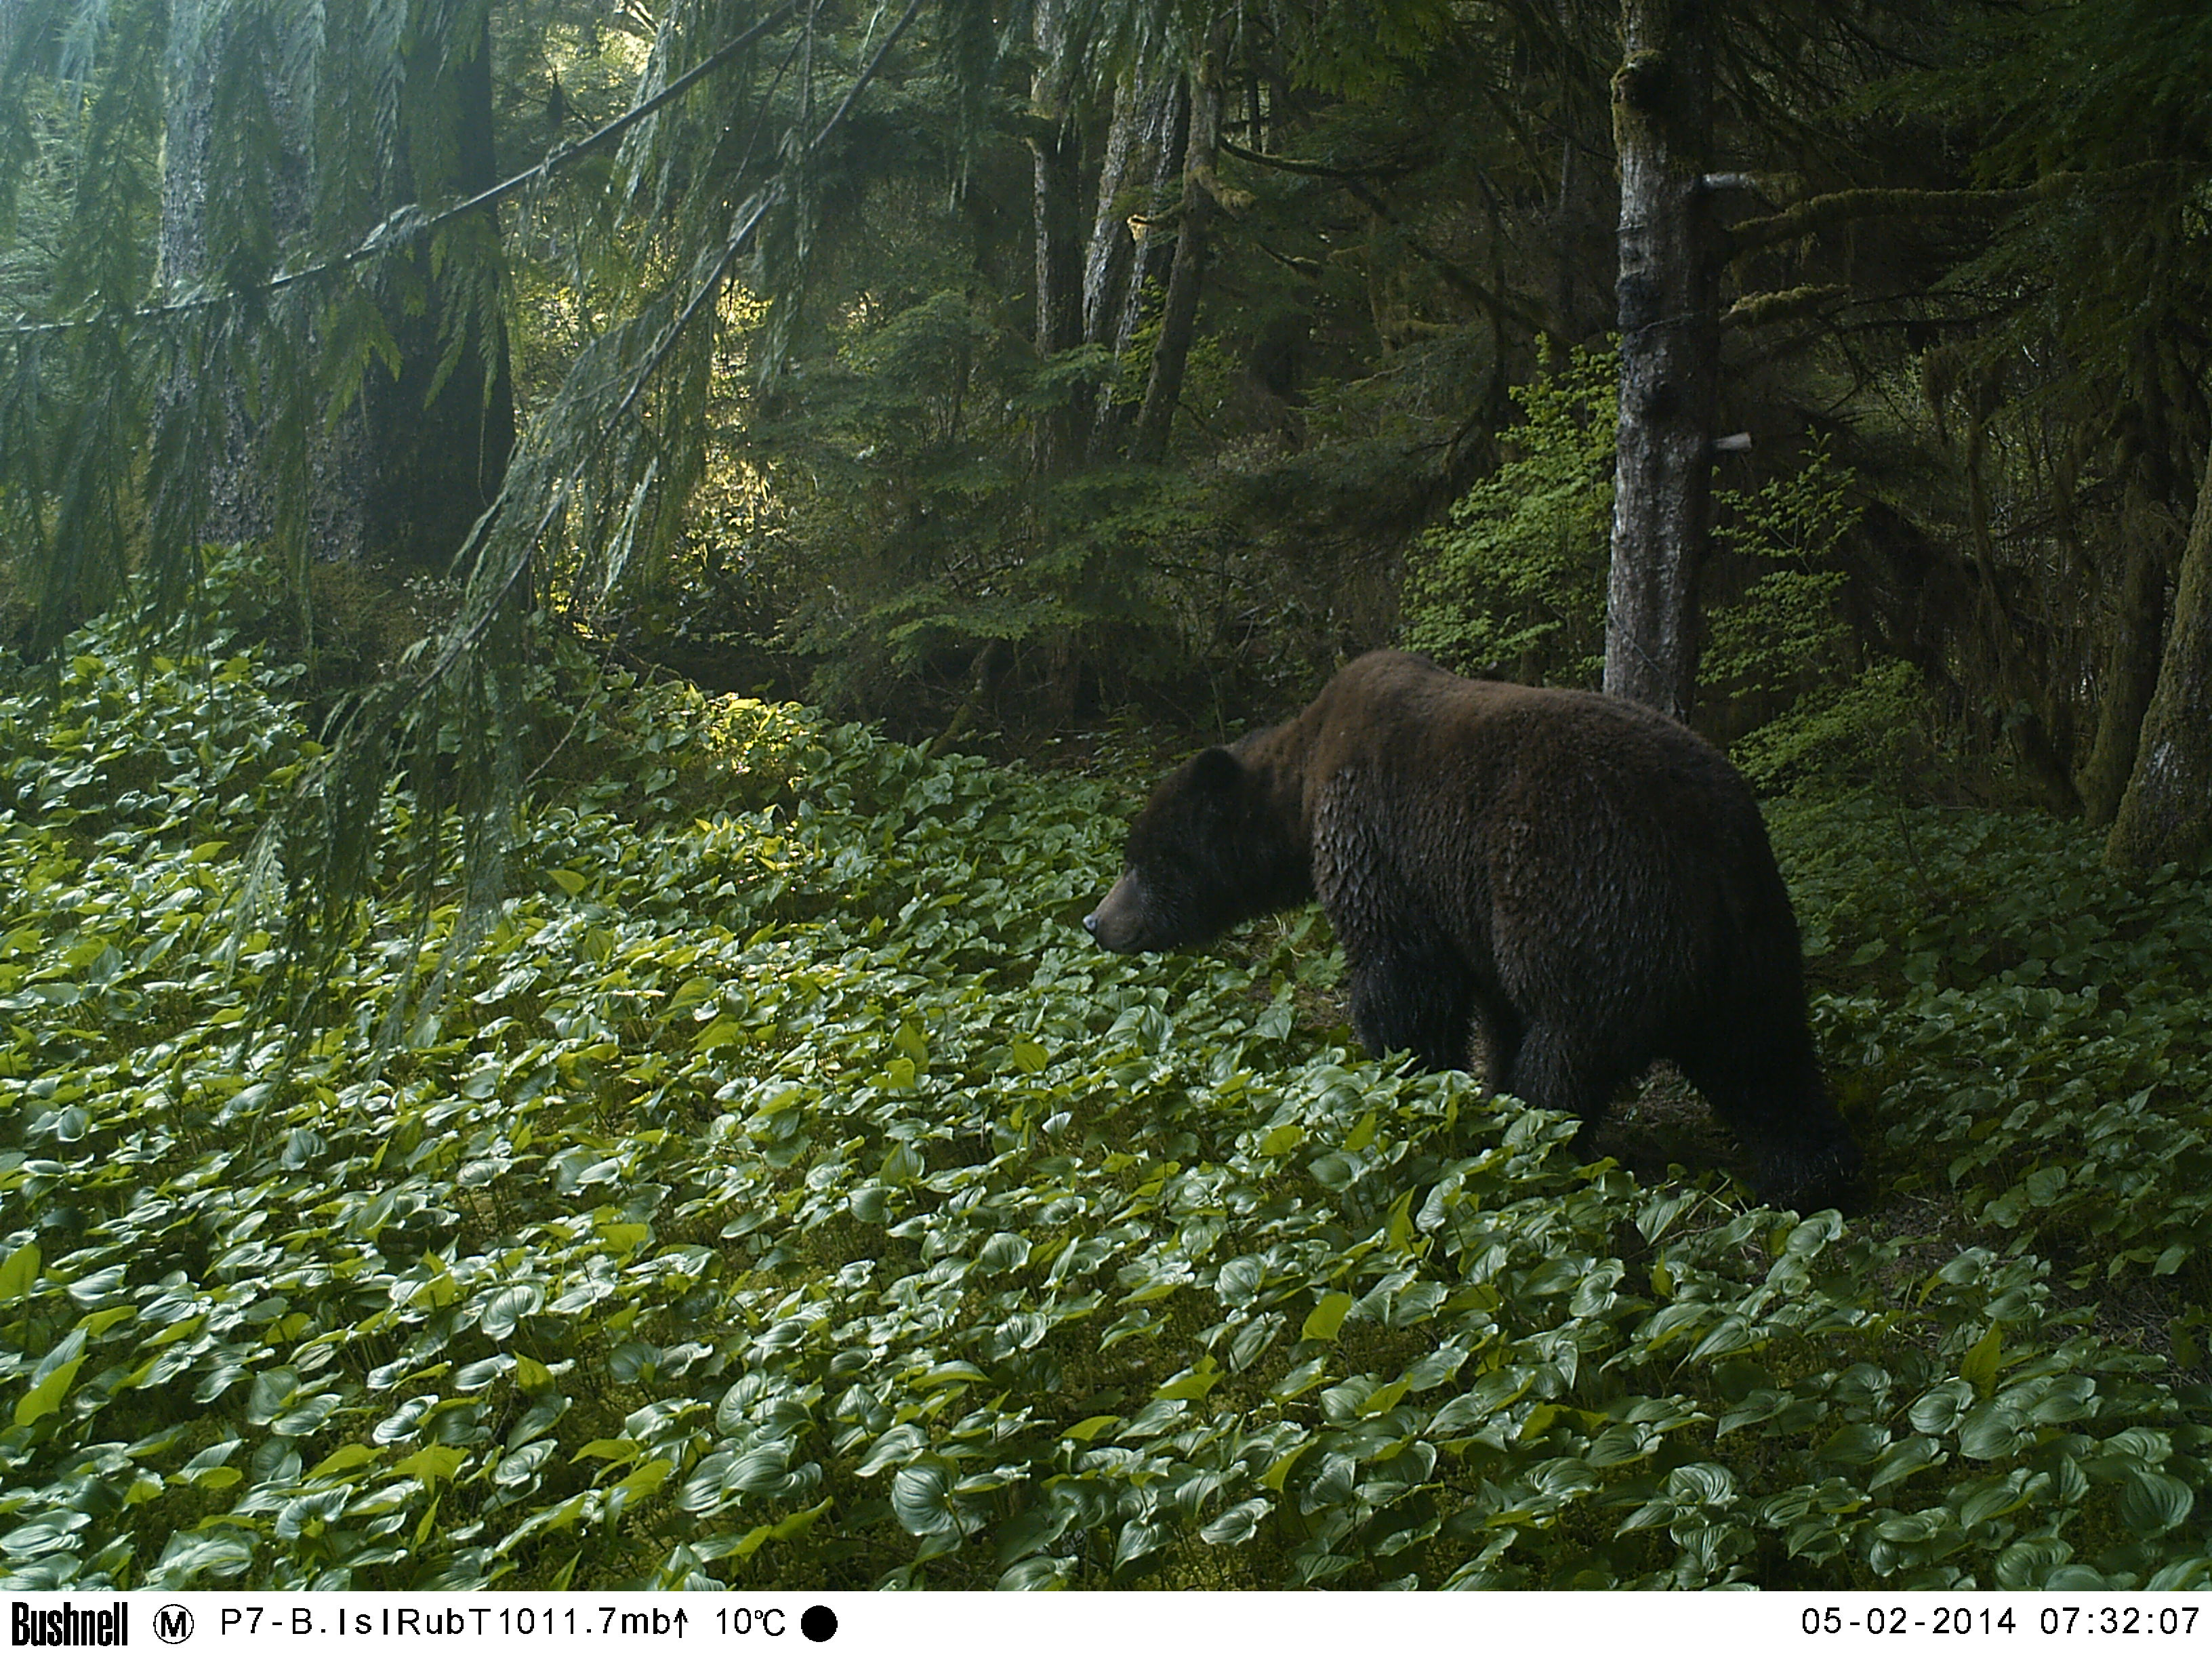 As apex consumers, grizzly bears are interconnected with both terrestrial and marine nutrient flows in the coastal rainforests of the Coastal First Nations and British Columbia, Canada. (Photo courtesy of Wuikinuxv Nation and Raincoast Conservation Foundation).